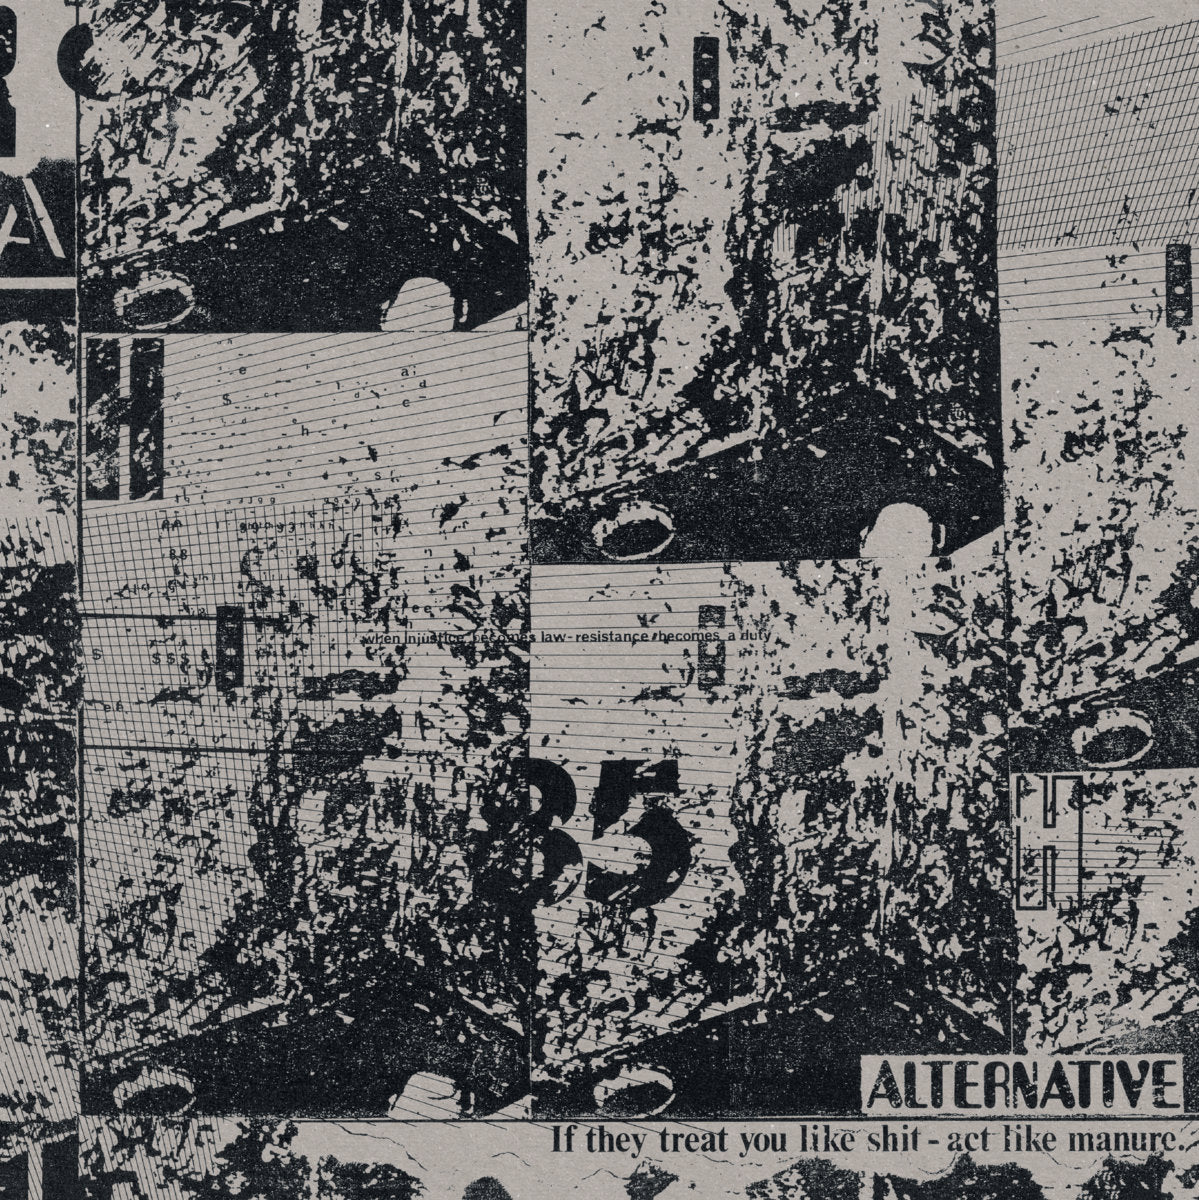 ALTERNATIVE - IF THEY TREAT YOU LIKE SHIT - ACT LIKE MANURE Vinyl LP